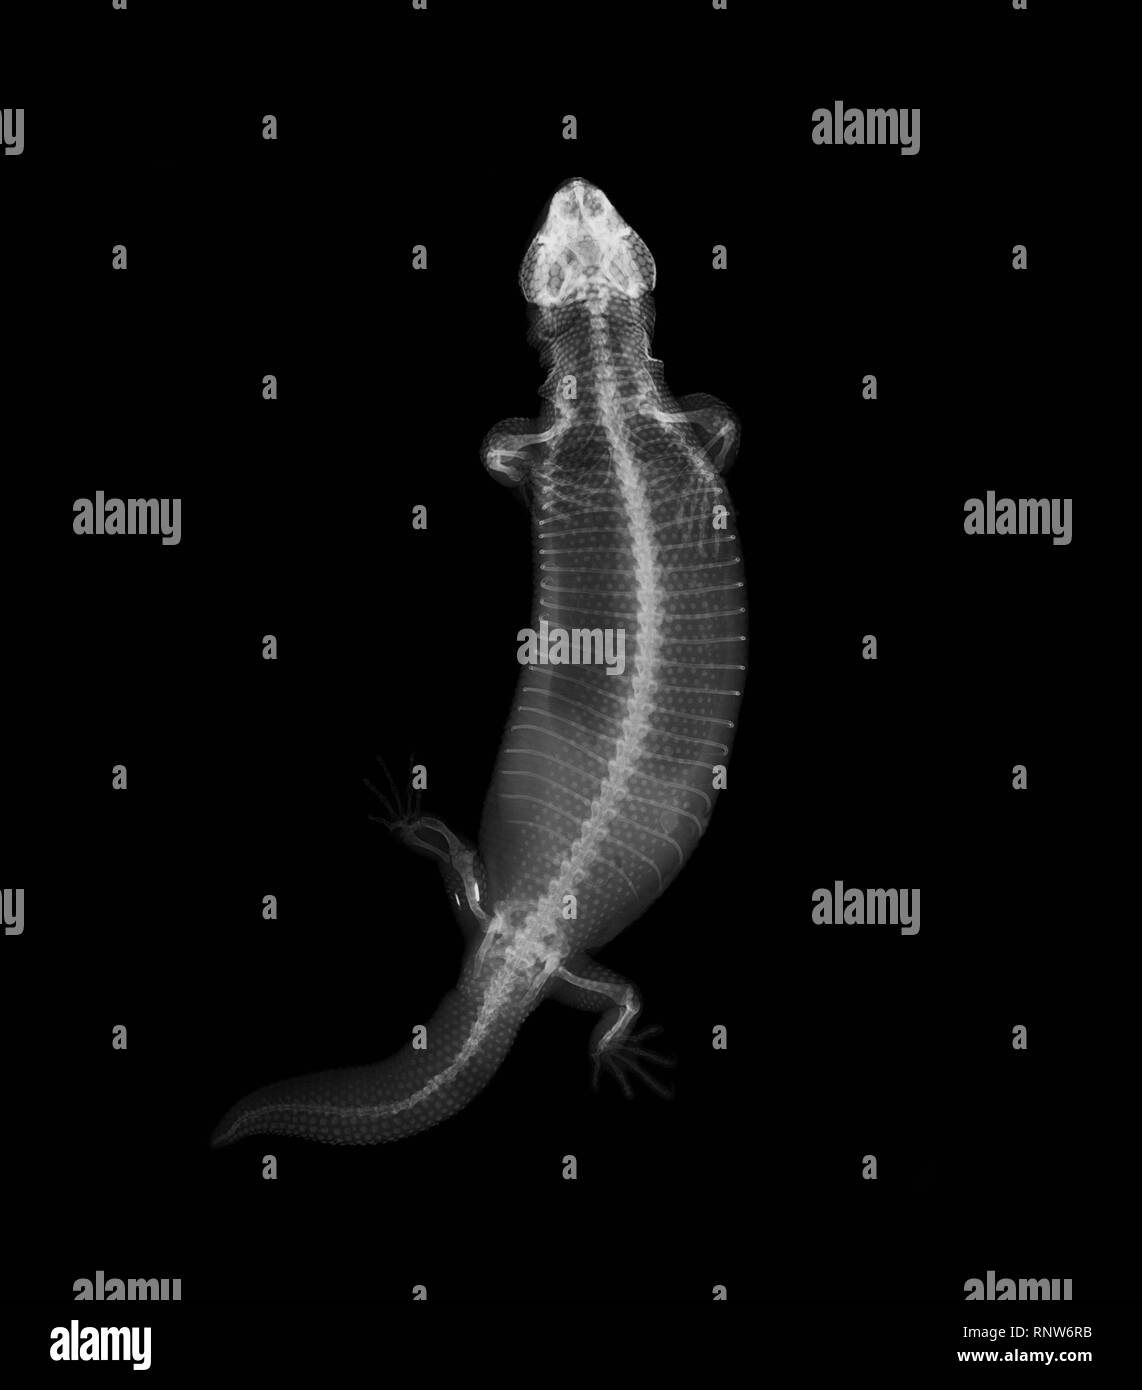 X-RAY VISION: ZSL London Zoo has shared a selection of amazing x-ray images, taken during routine health checks of its 18,000 animals.    The images, taken by the ZooÕs expert veterinary team at the on-site clinic reveal the inner workings of a variety of different species, including frogs, snakes, geckos and turtles.   ZSL London Zoo veterinary nurse Heather Mackintosh says: ÒWe can tell so much about an animalÕs health from looking at an x-ray - from the strength of their bones to how healthy their heart is.   ÒTheyÕre vital to our work, and even though we get to see unique x-rays fairly oft Stock Photo